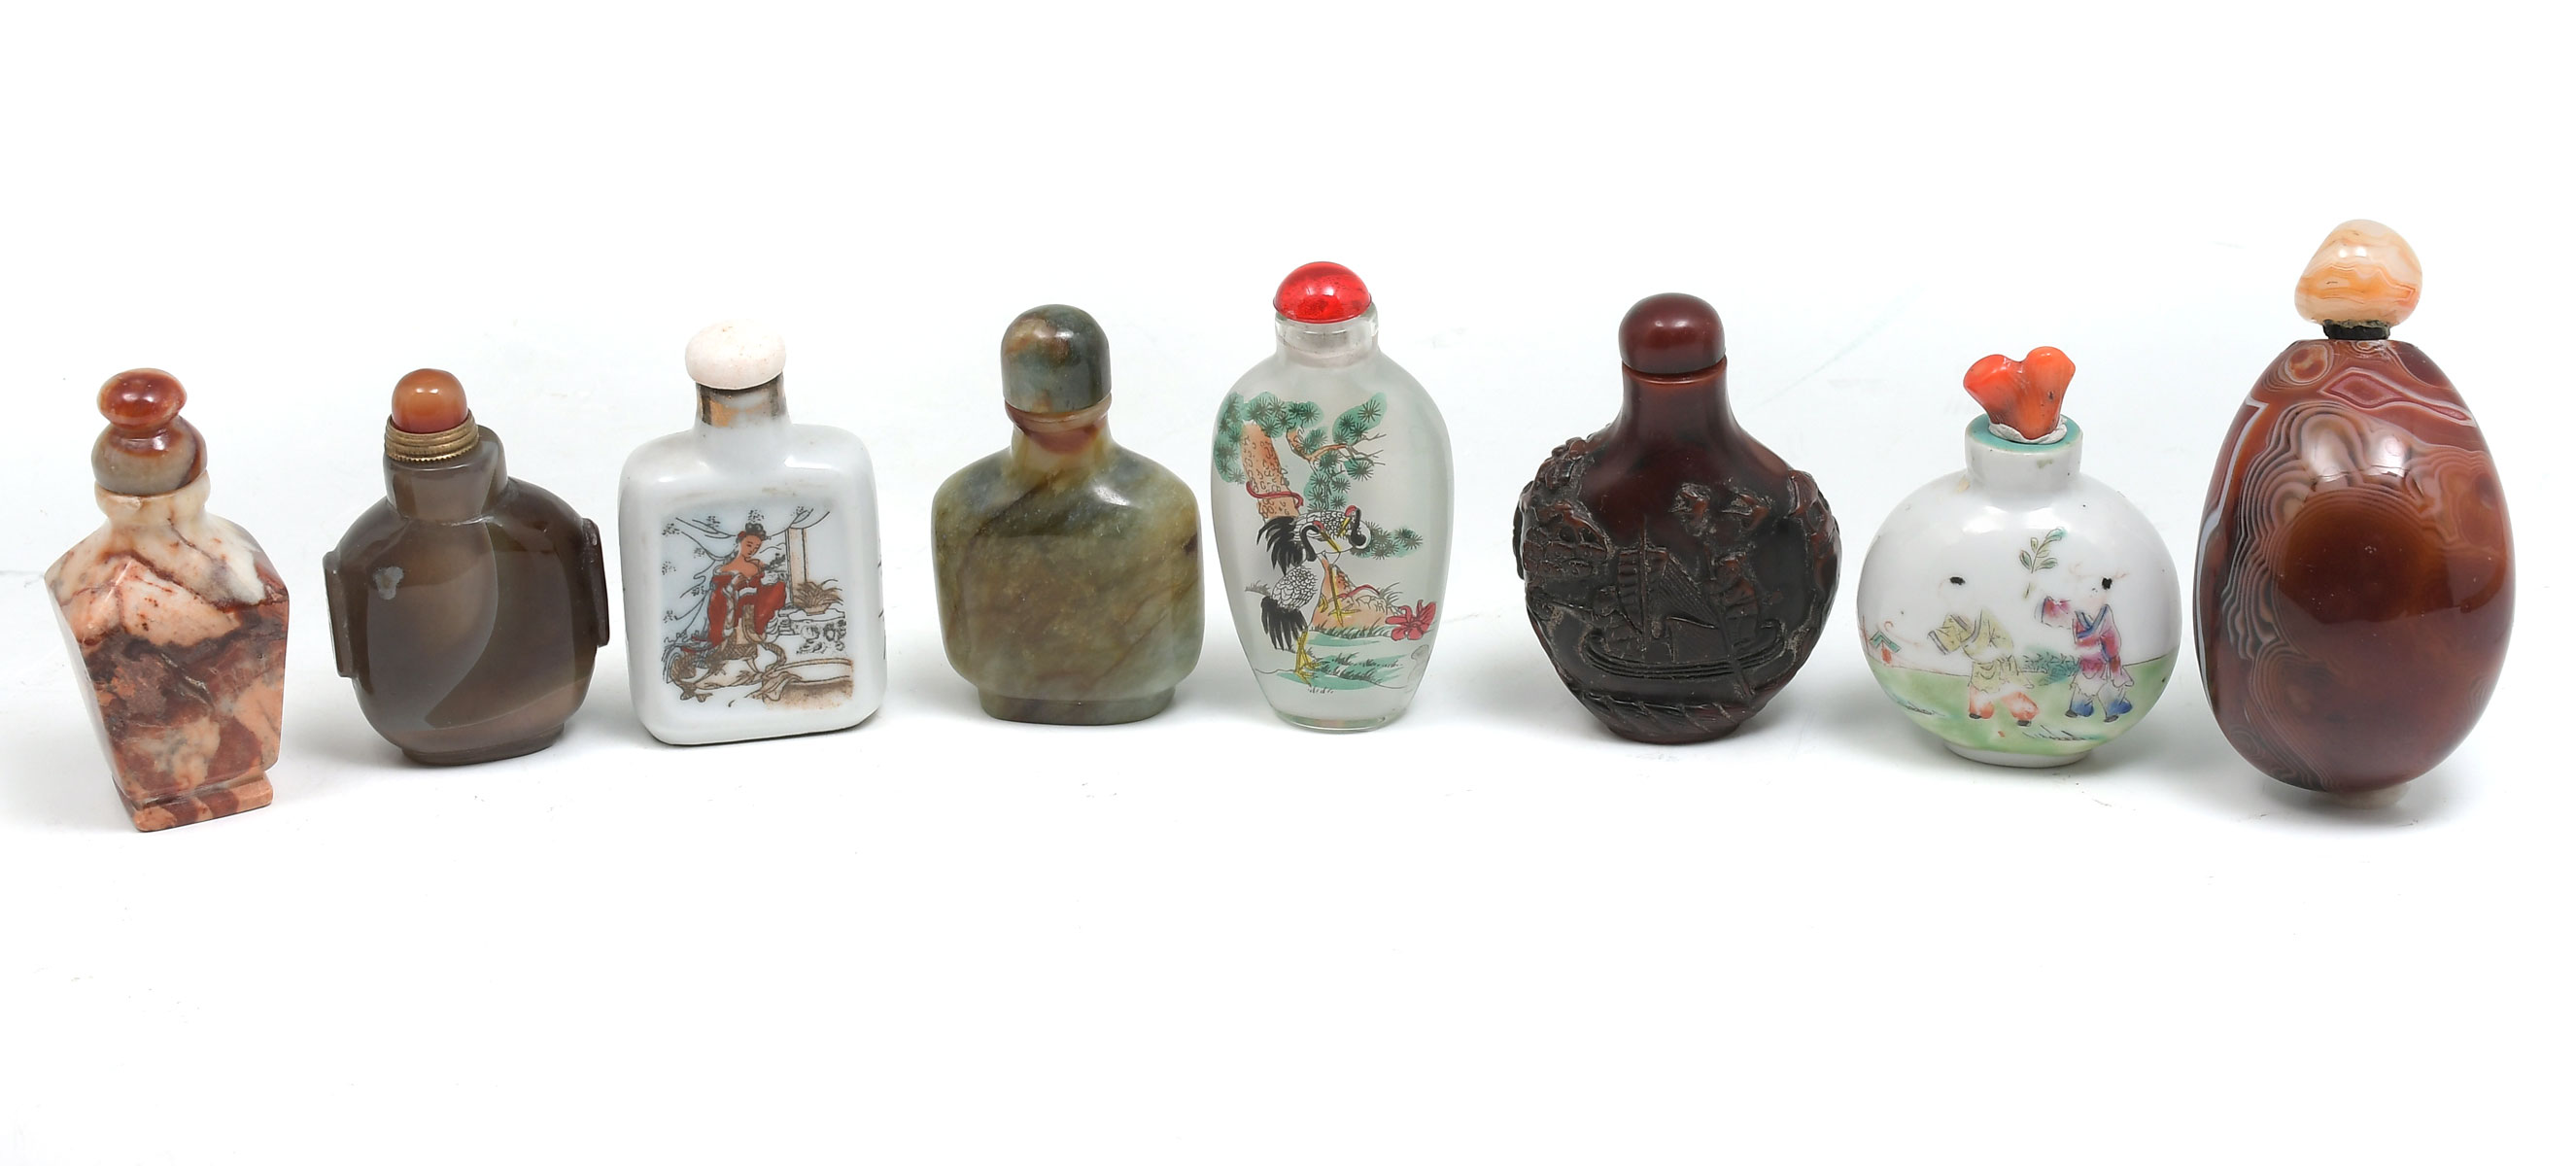 9 PC CHINESE SNUFF BOTTLES Comprised 36c4a1